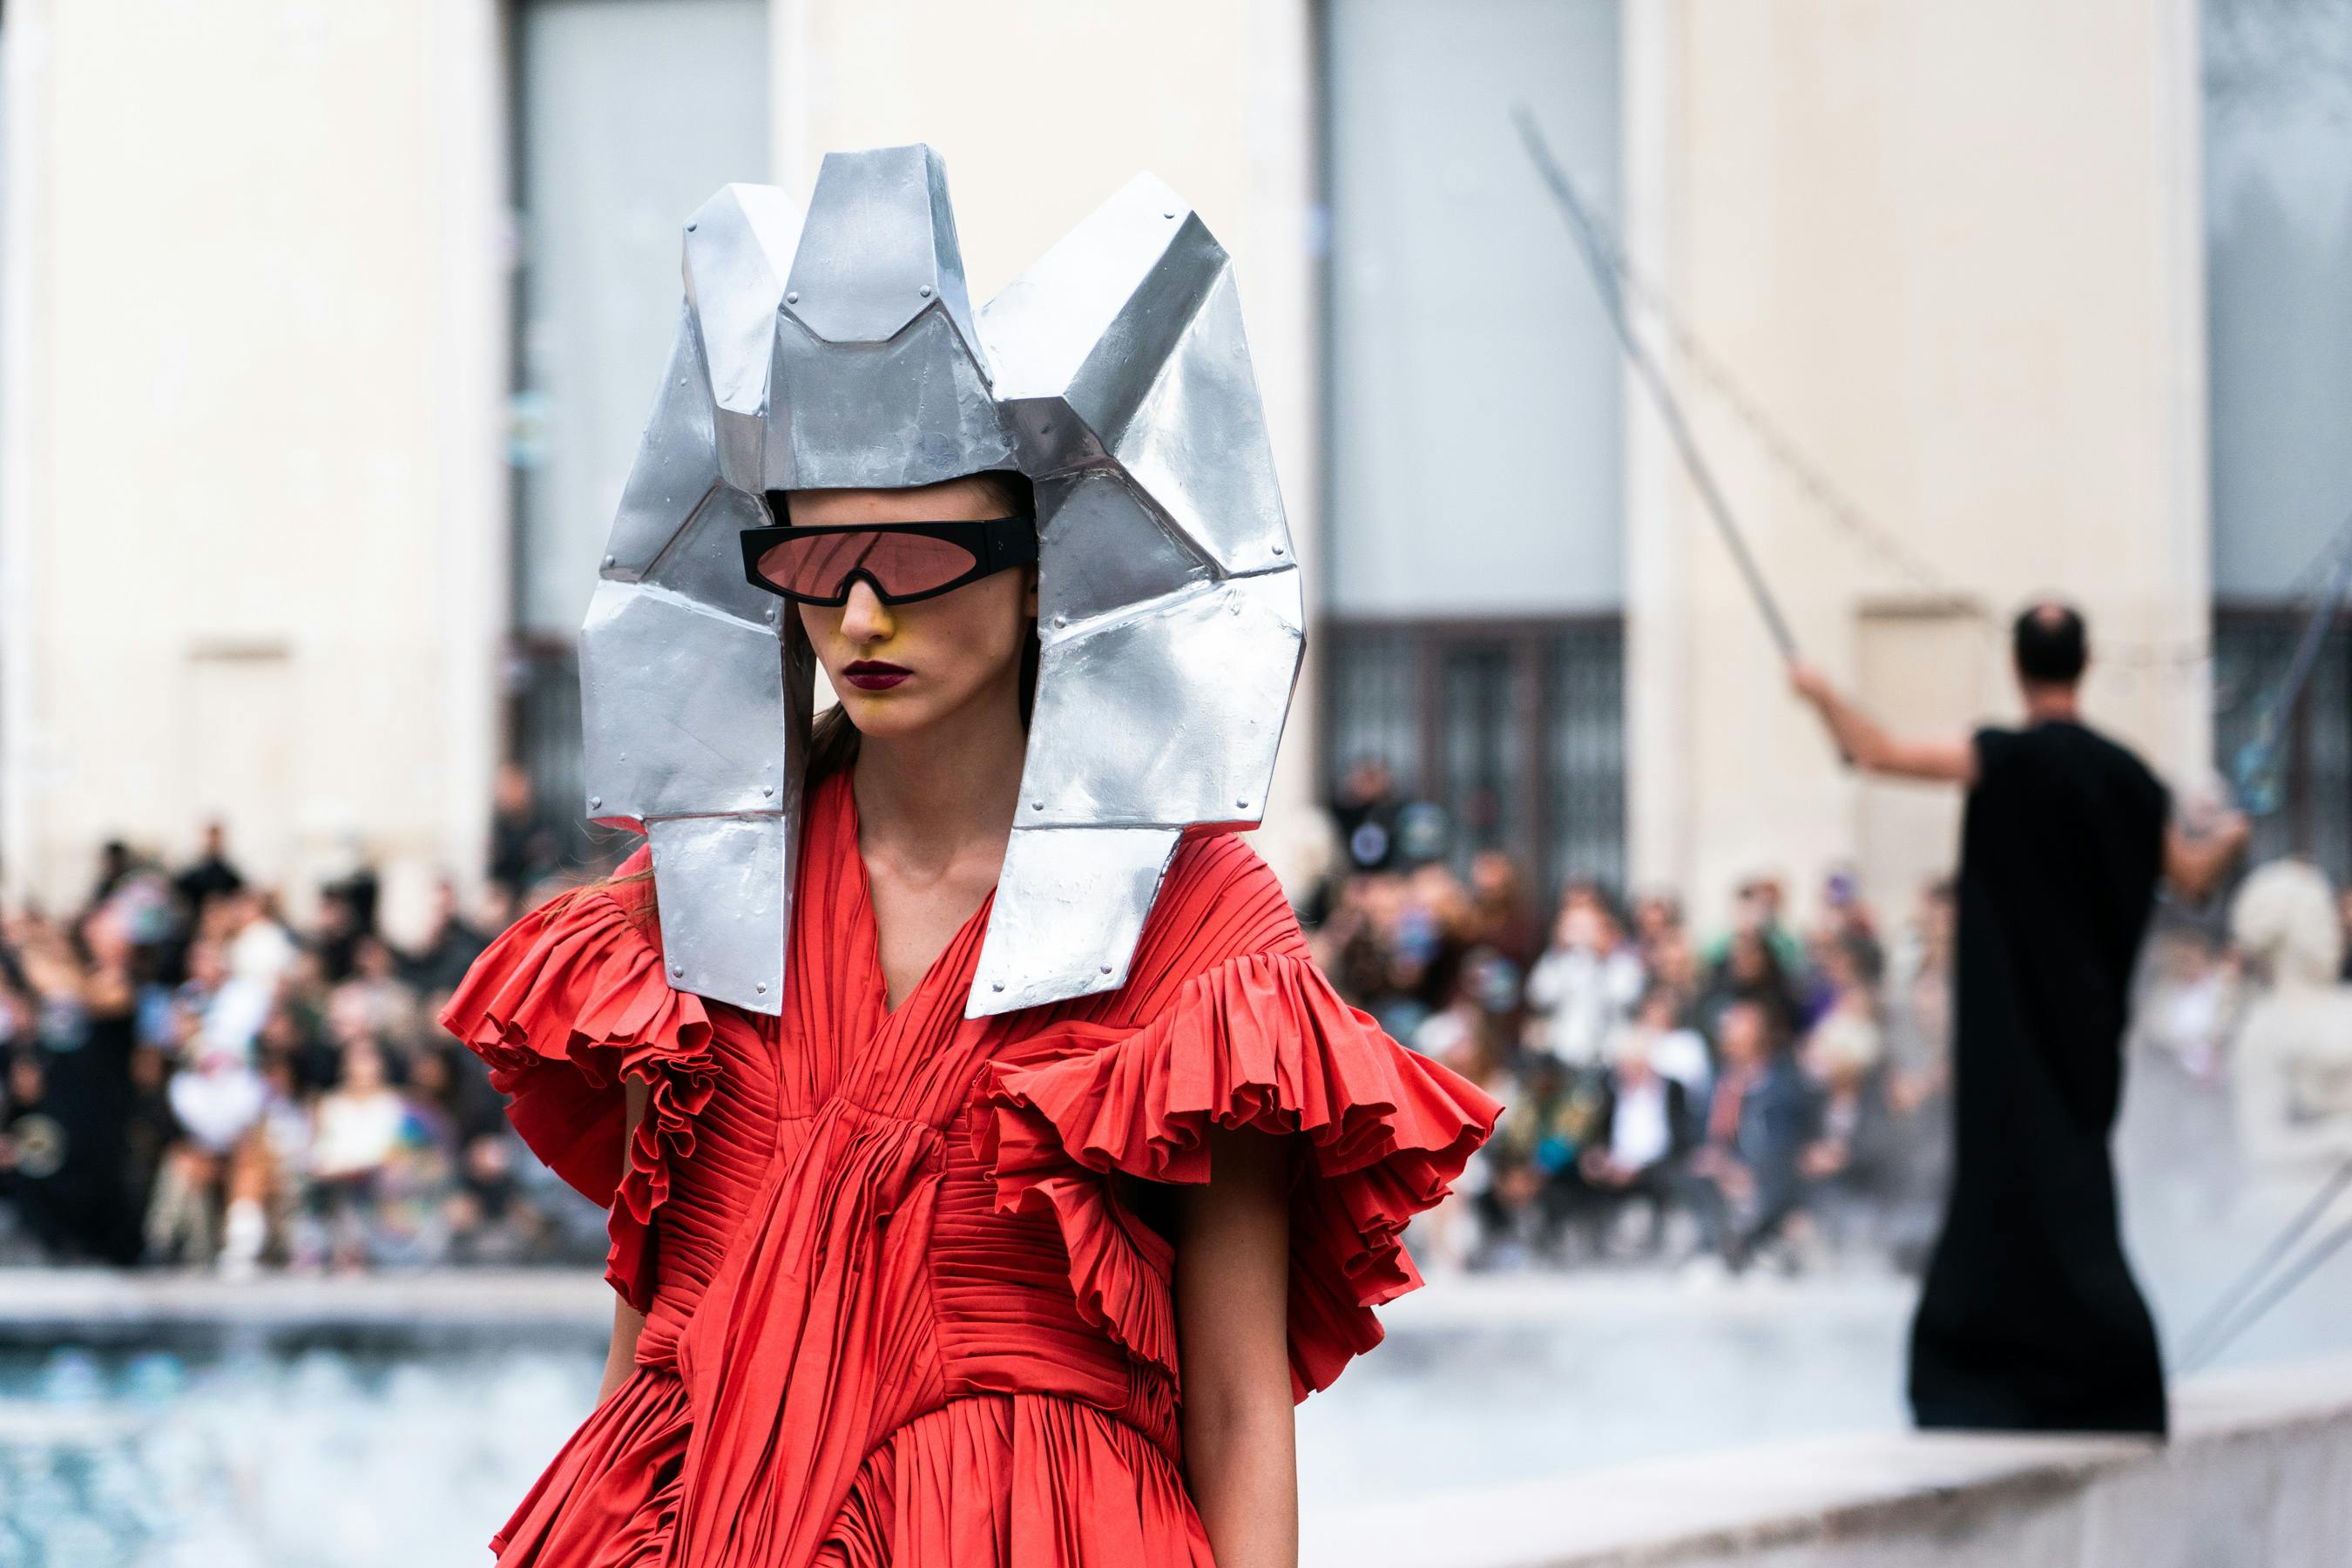 Rick Owens Runway Details Silver Aztec Headpiece Retro Futuristic Black Rectangular Framed Sunglasses With Red Reflective Lenses Red Ruffled Long Gown Womens SS20 Tecautl